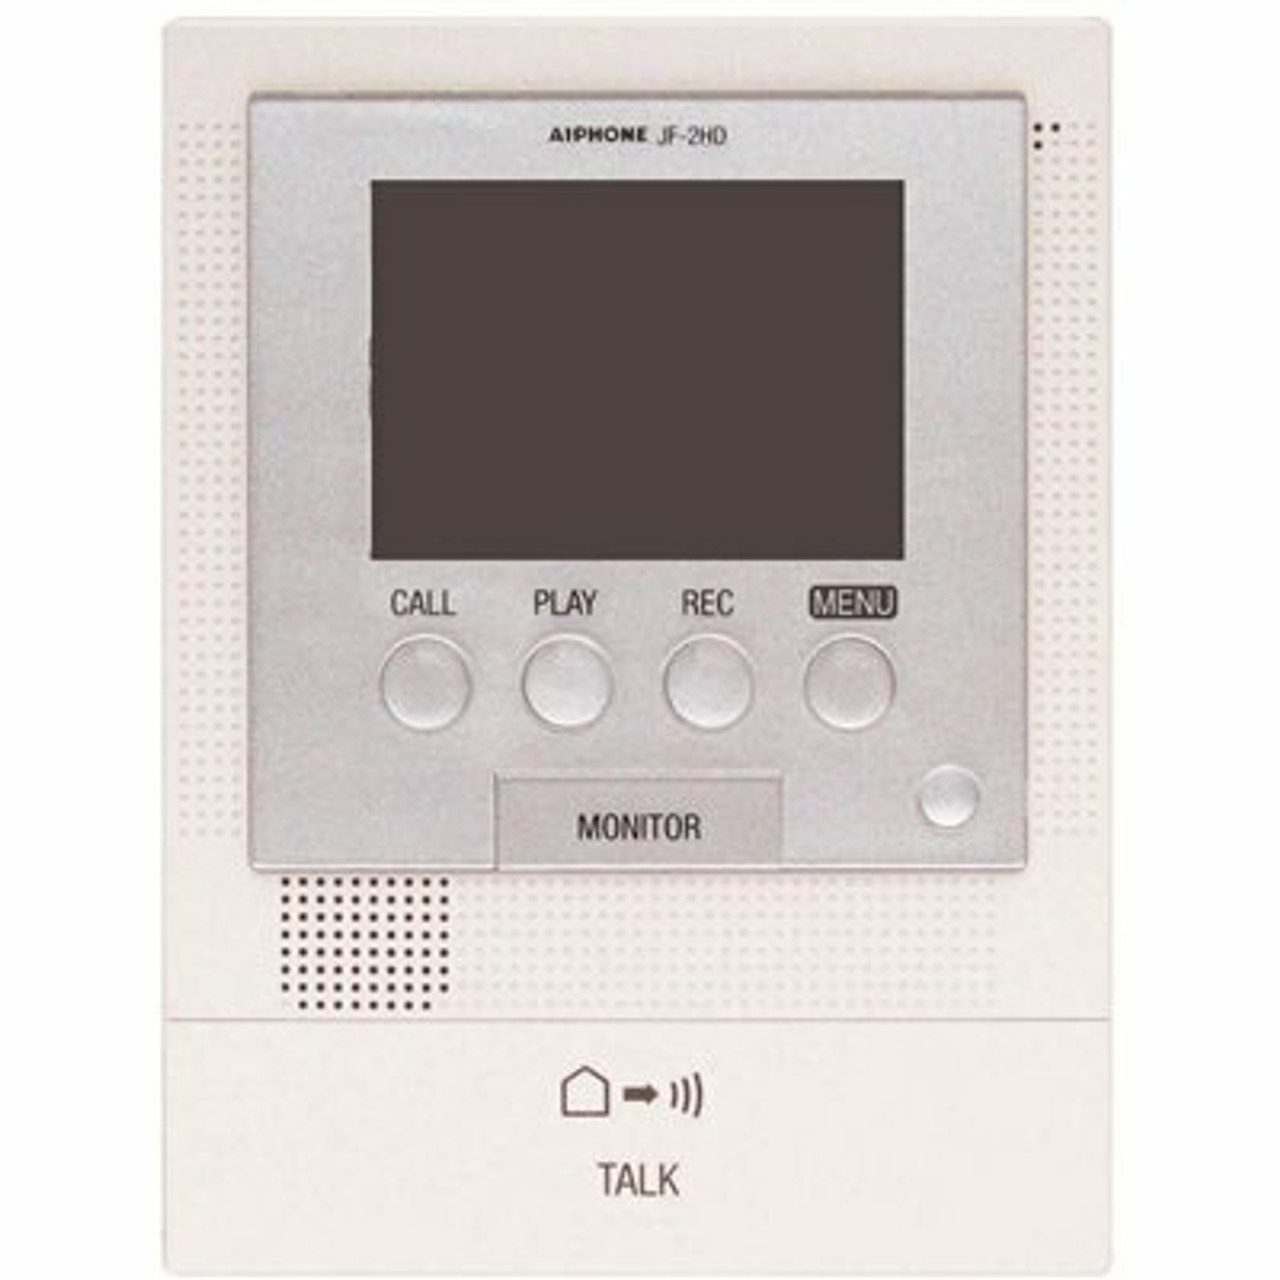 Aiphone Jf Series Surface Mount 1-Channel Video Sub-Master Station Intercom With Door Release, Picture, Message, White - Gray